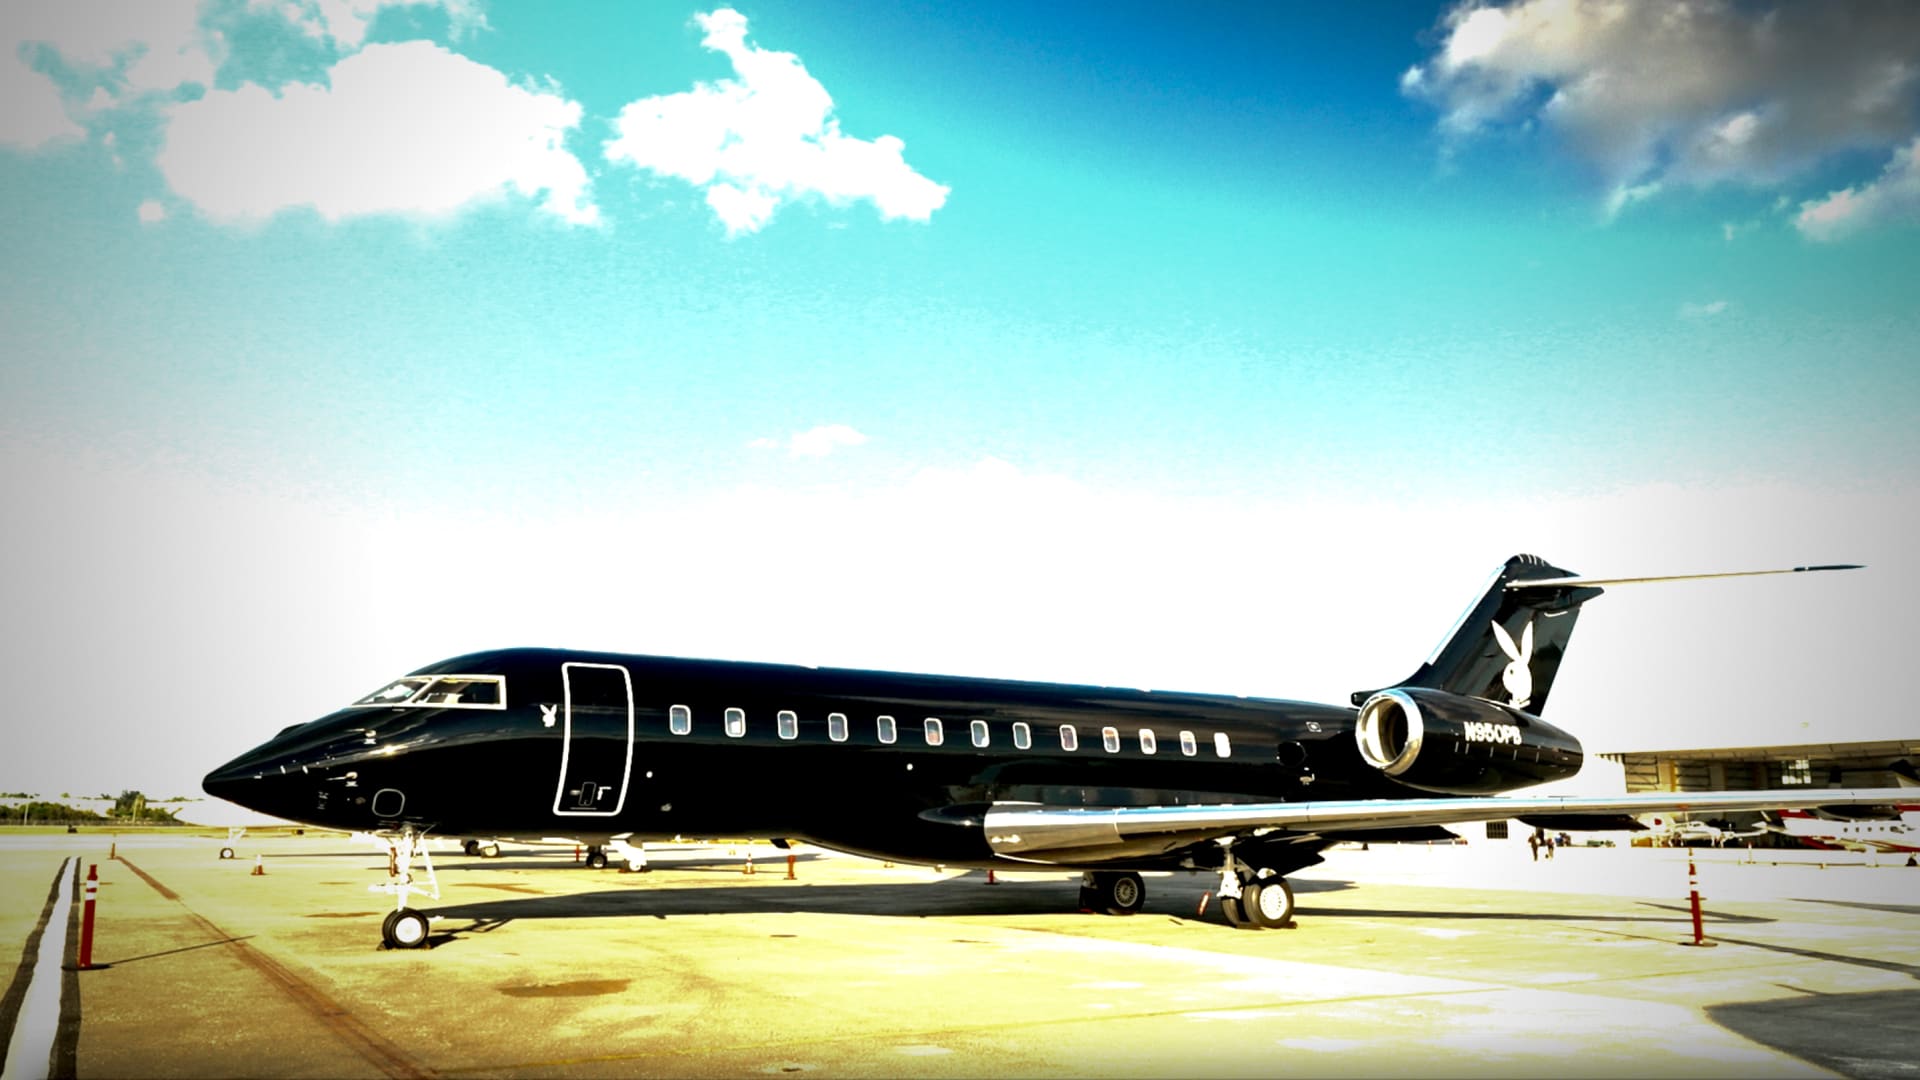 Playboy's new corporate jet is a reboot of the Big Bunny Hugh Hefner flew in the '70s. Today's model is an all-black Global Express that cost $12 million.